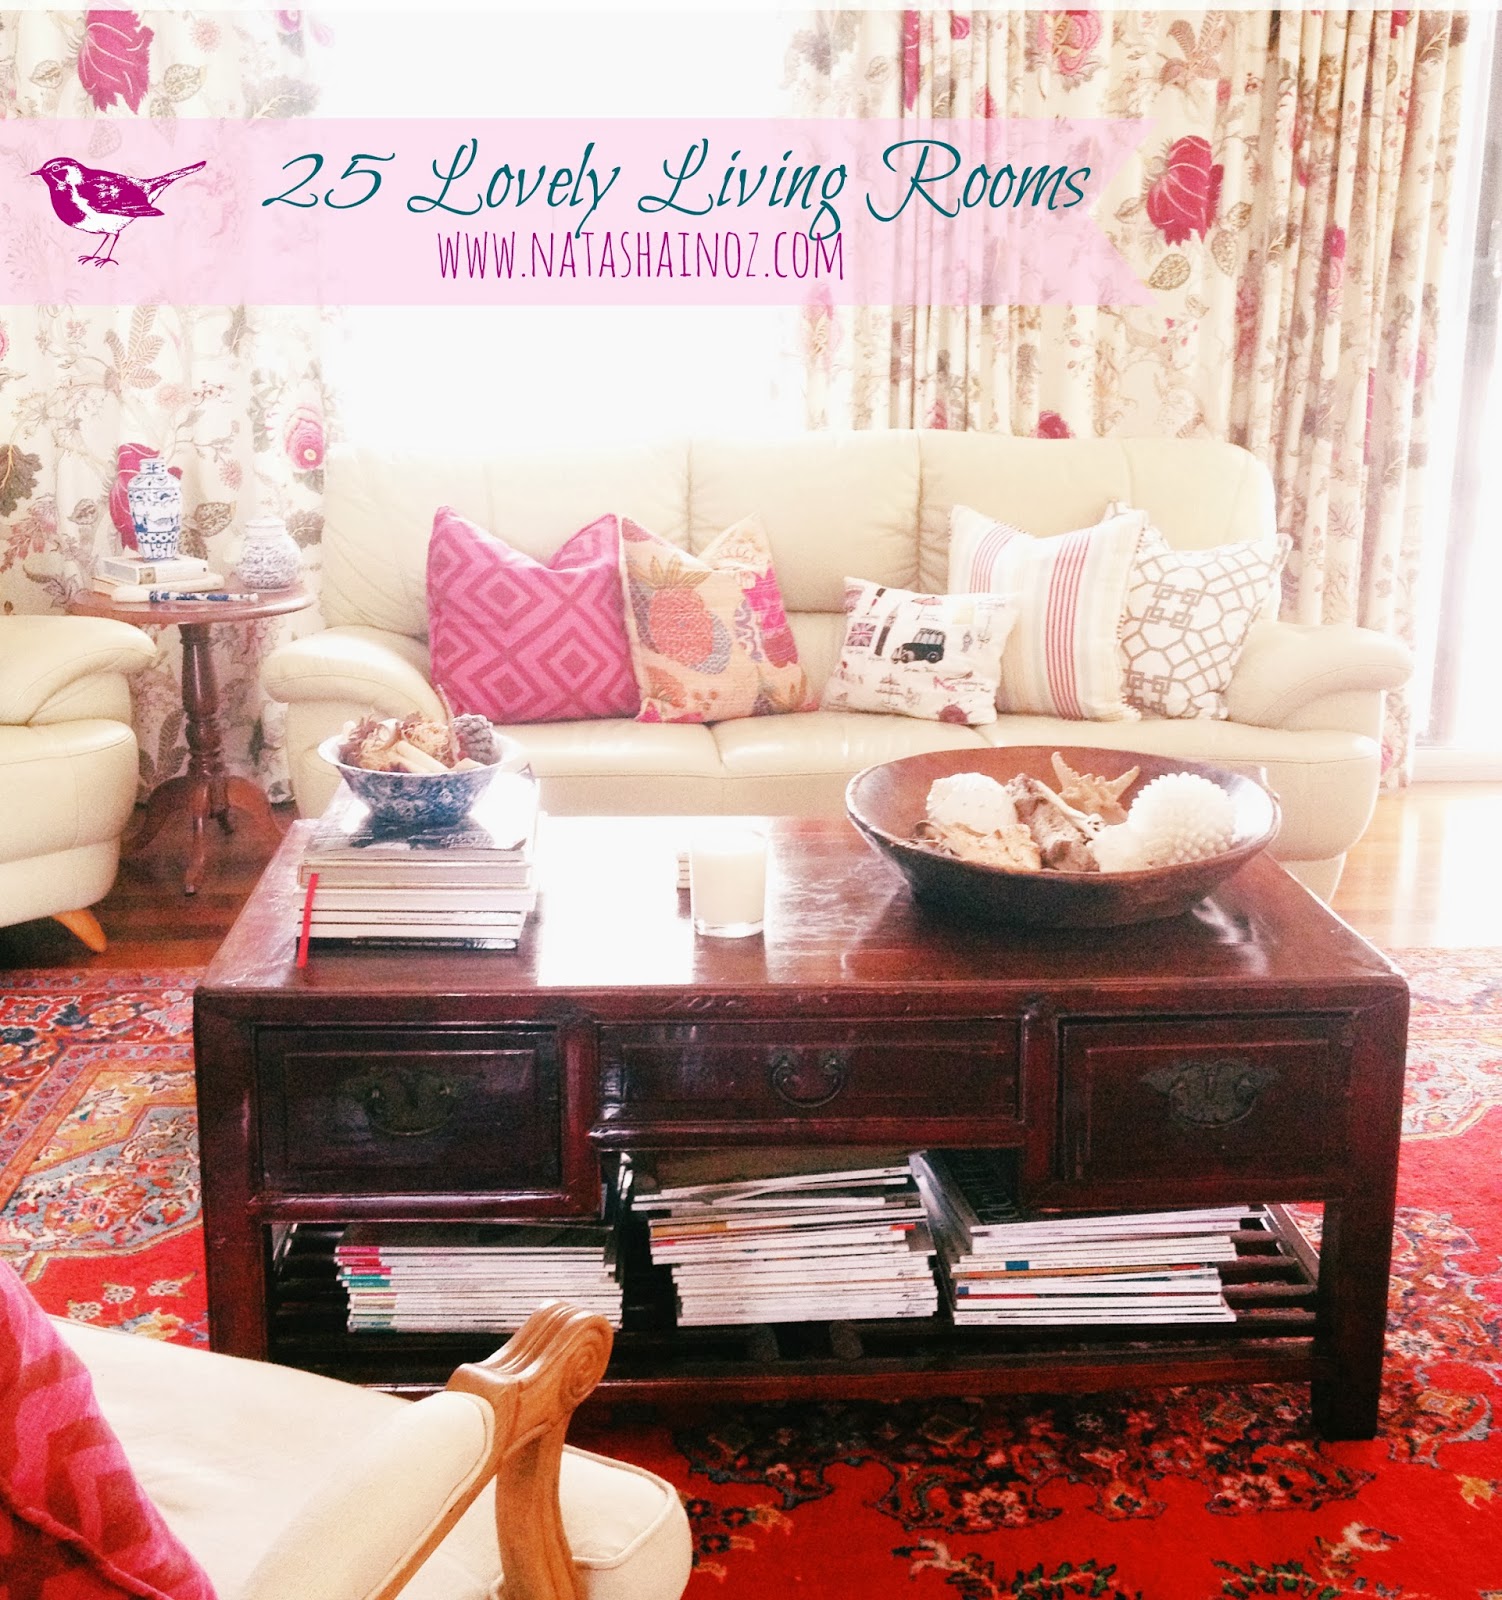 25 Lovely Living Rooms, Lounge Room